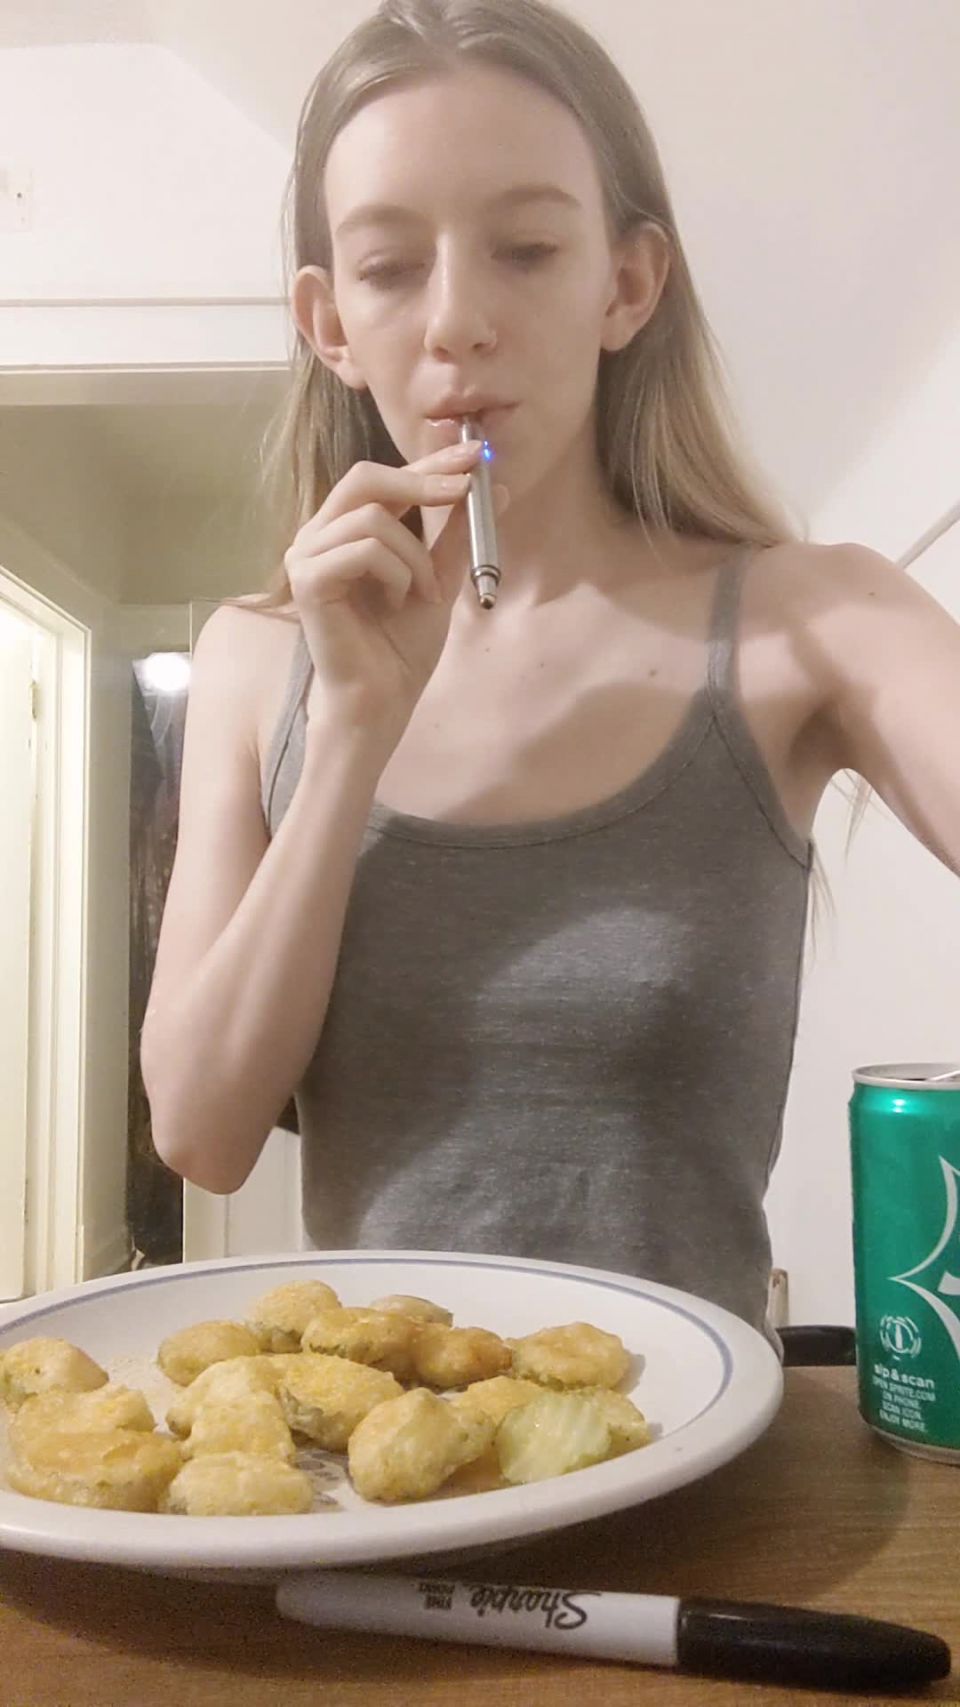 M@nyV1ds - LucySpanks - Blonde Eating and Burping